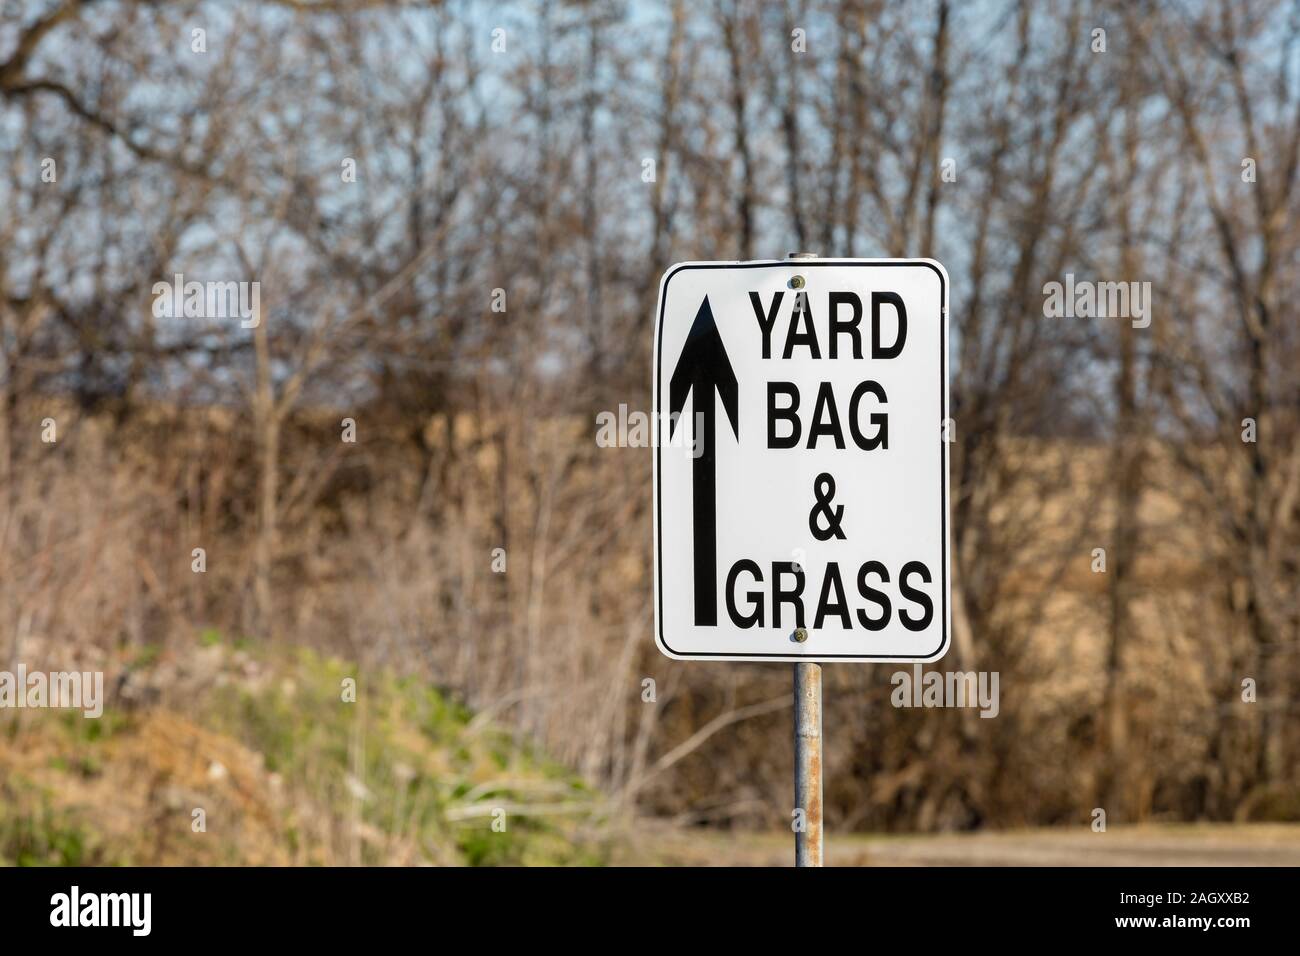 Leaf, yard bag, and grass clippings direction sign with arrow at city yard waste disposal site Stock Photo